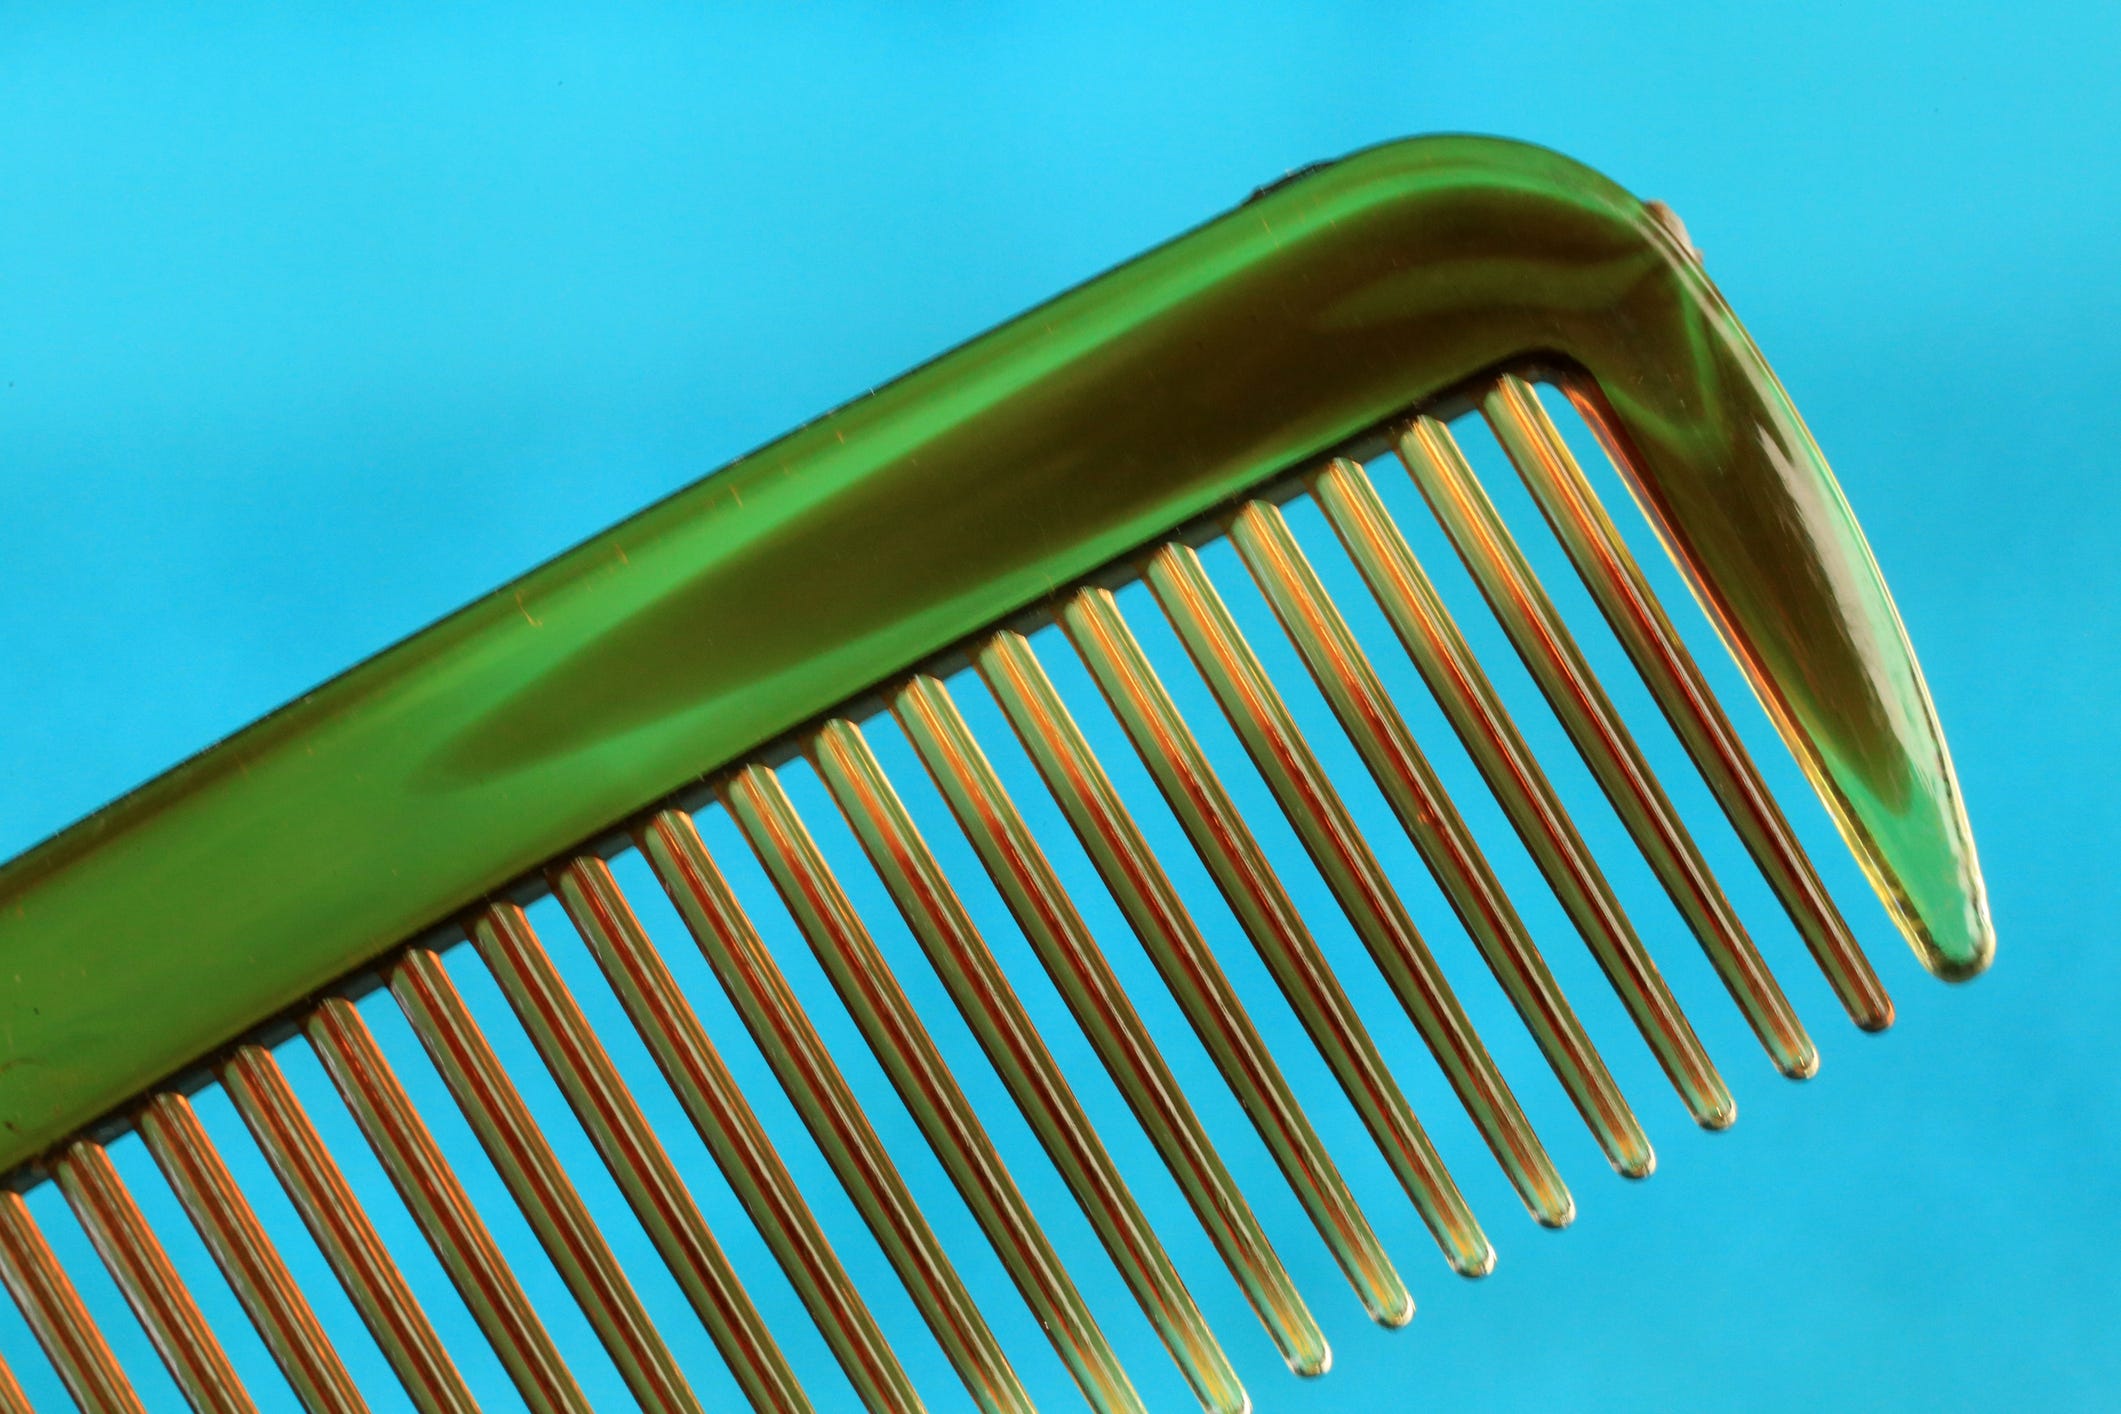 close up of a hair grooming comb